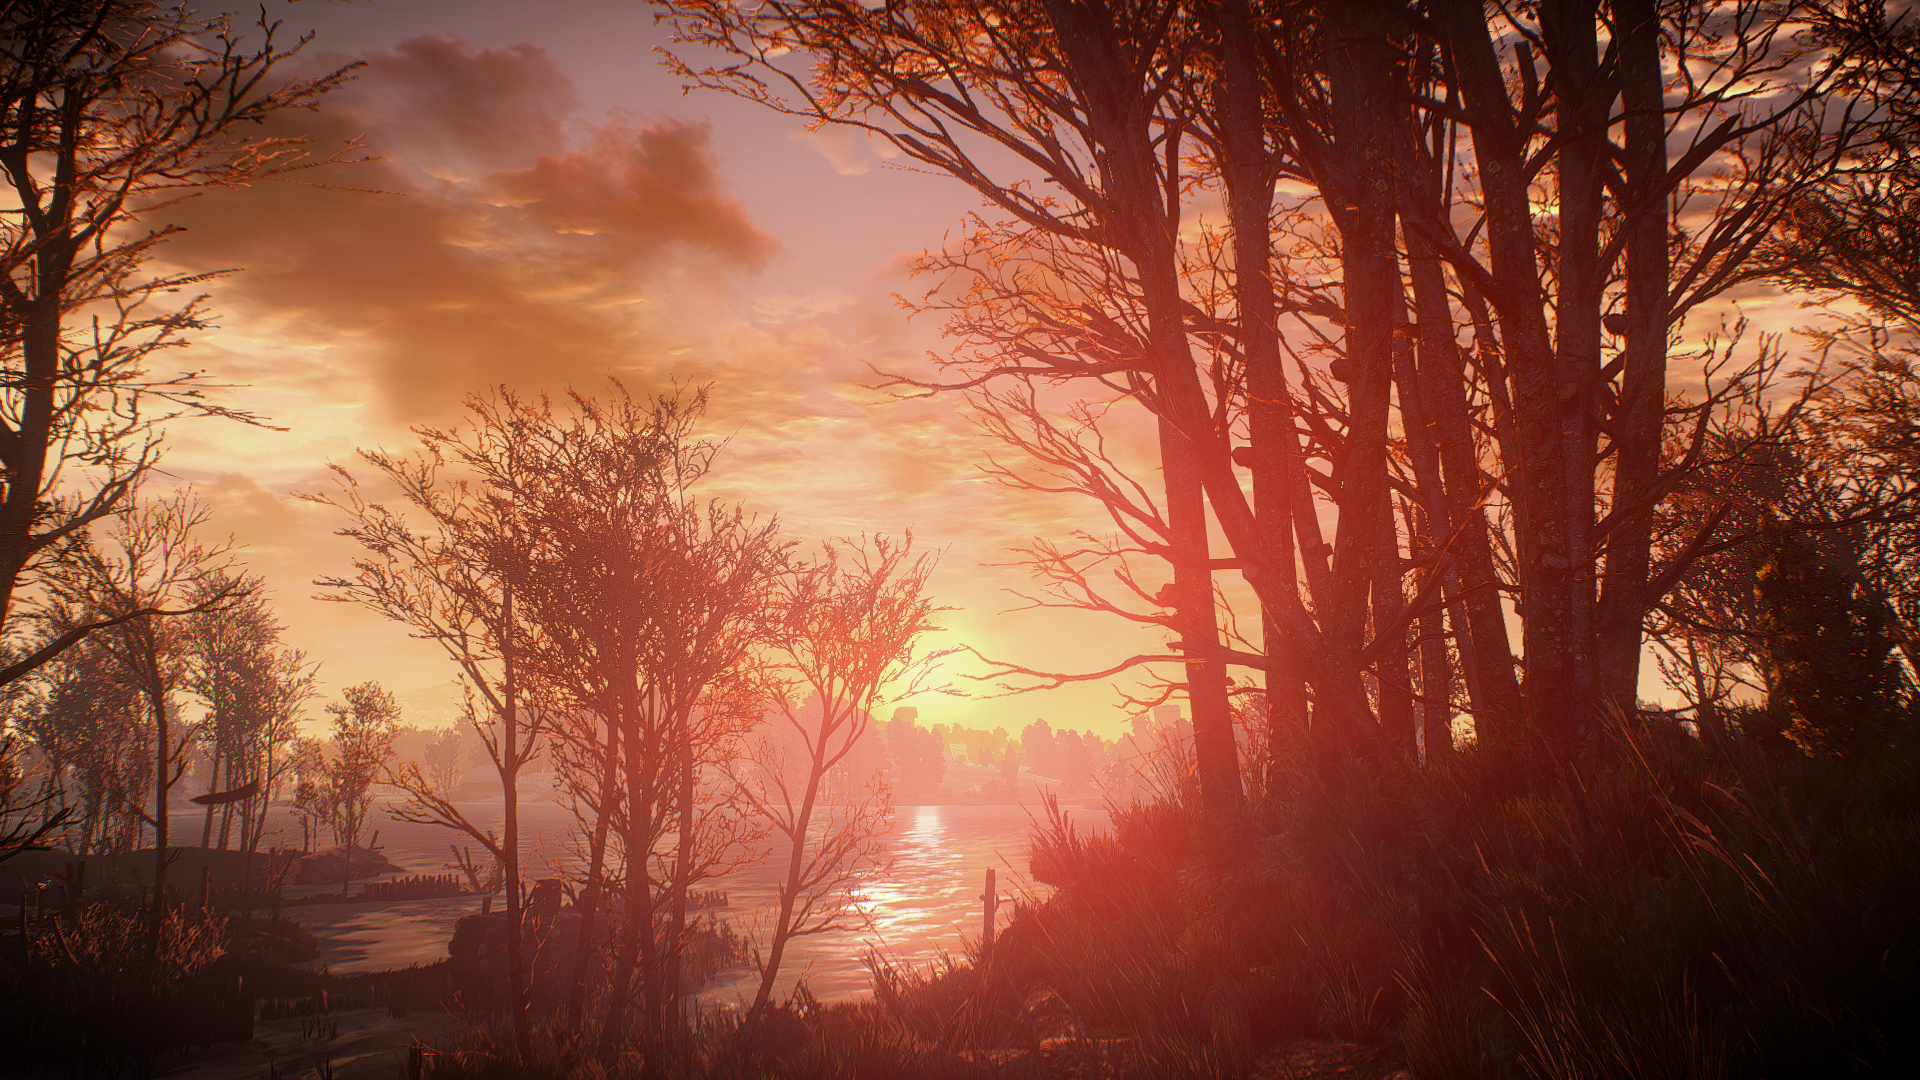 General 1920x1080 The Witcher 3: Wild Hunt video games landscape screen shot RPG PC gaming